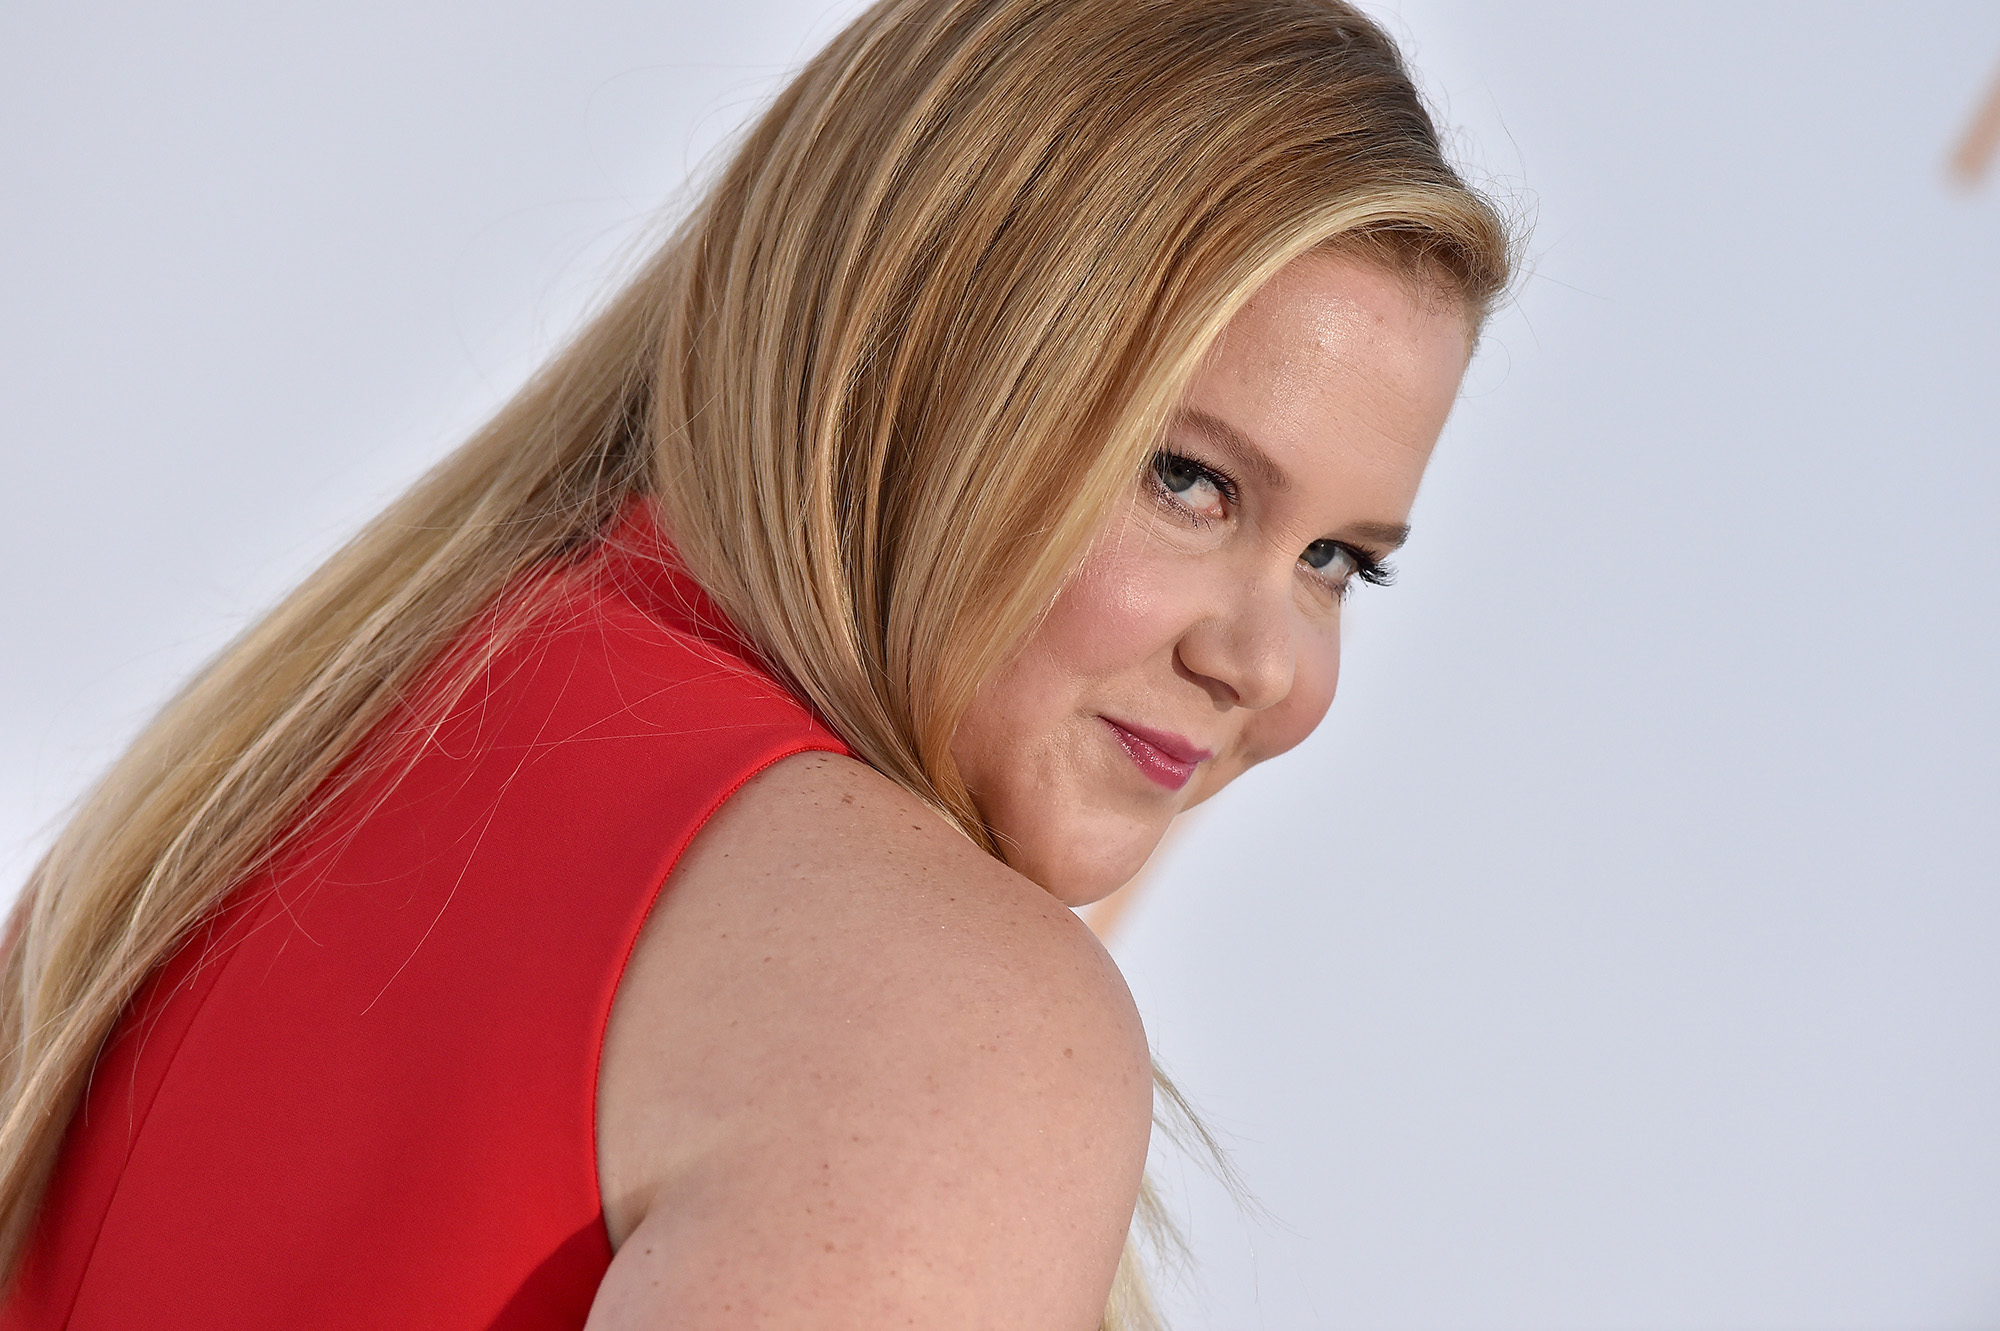 Amy Schumer Shows Fans Her C-Section Scar In New Viral 